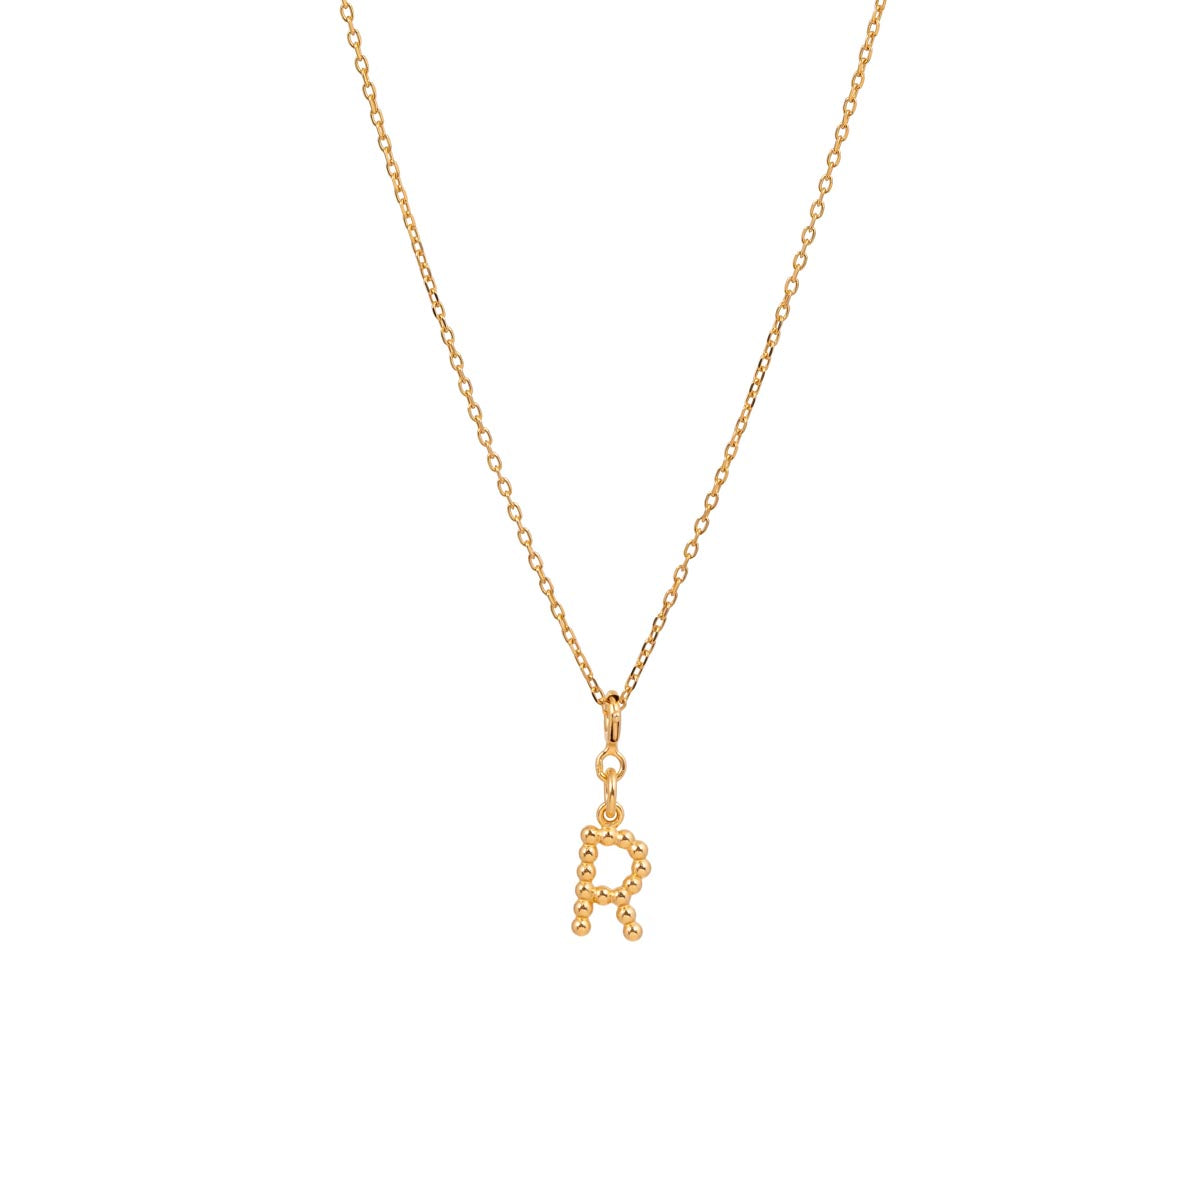 Yllätys Monogram Necklace R, gold-plated silver